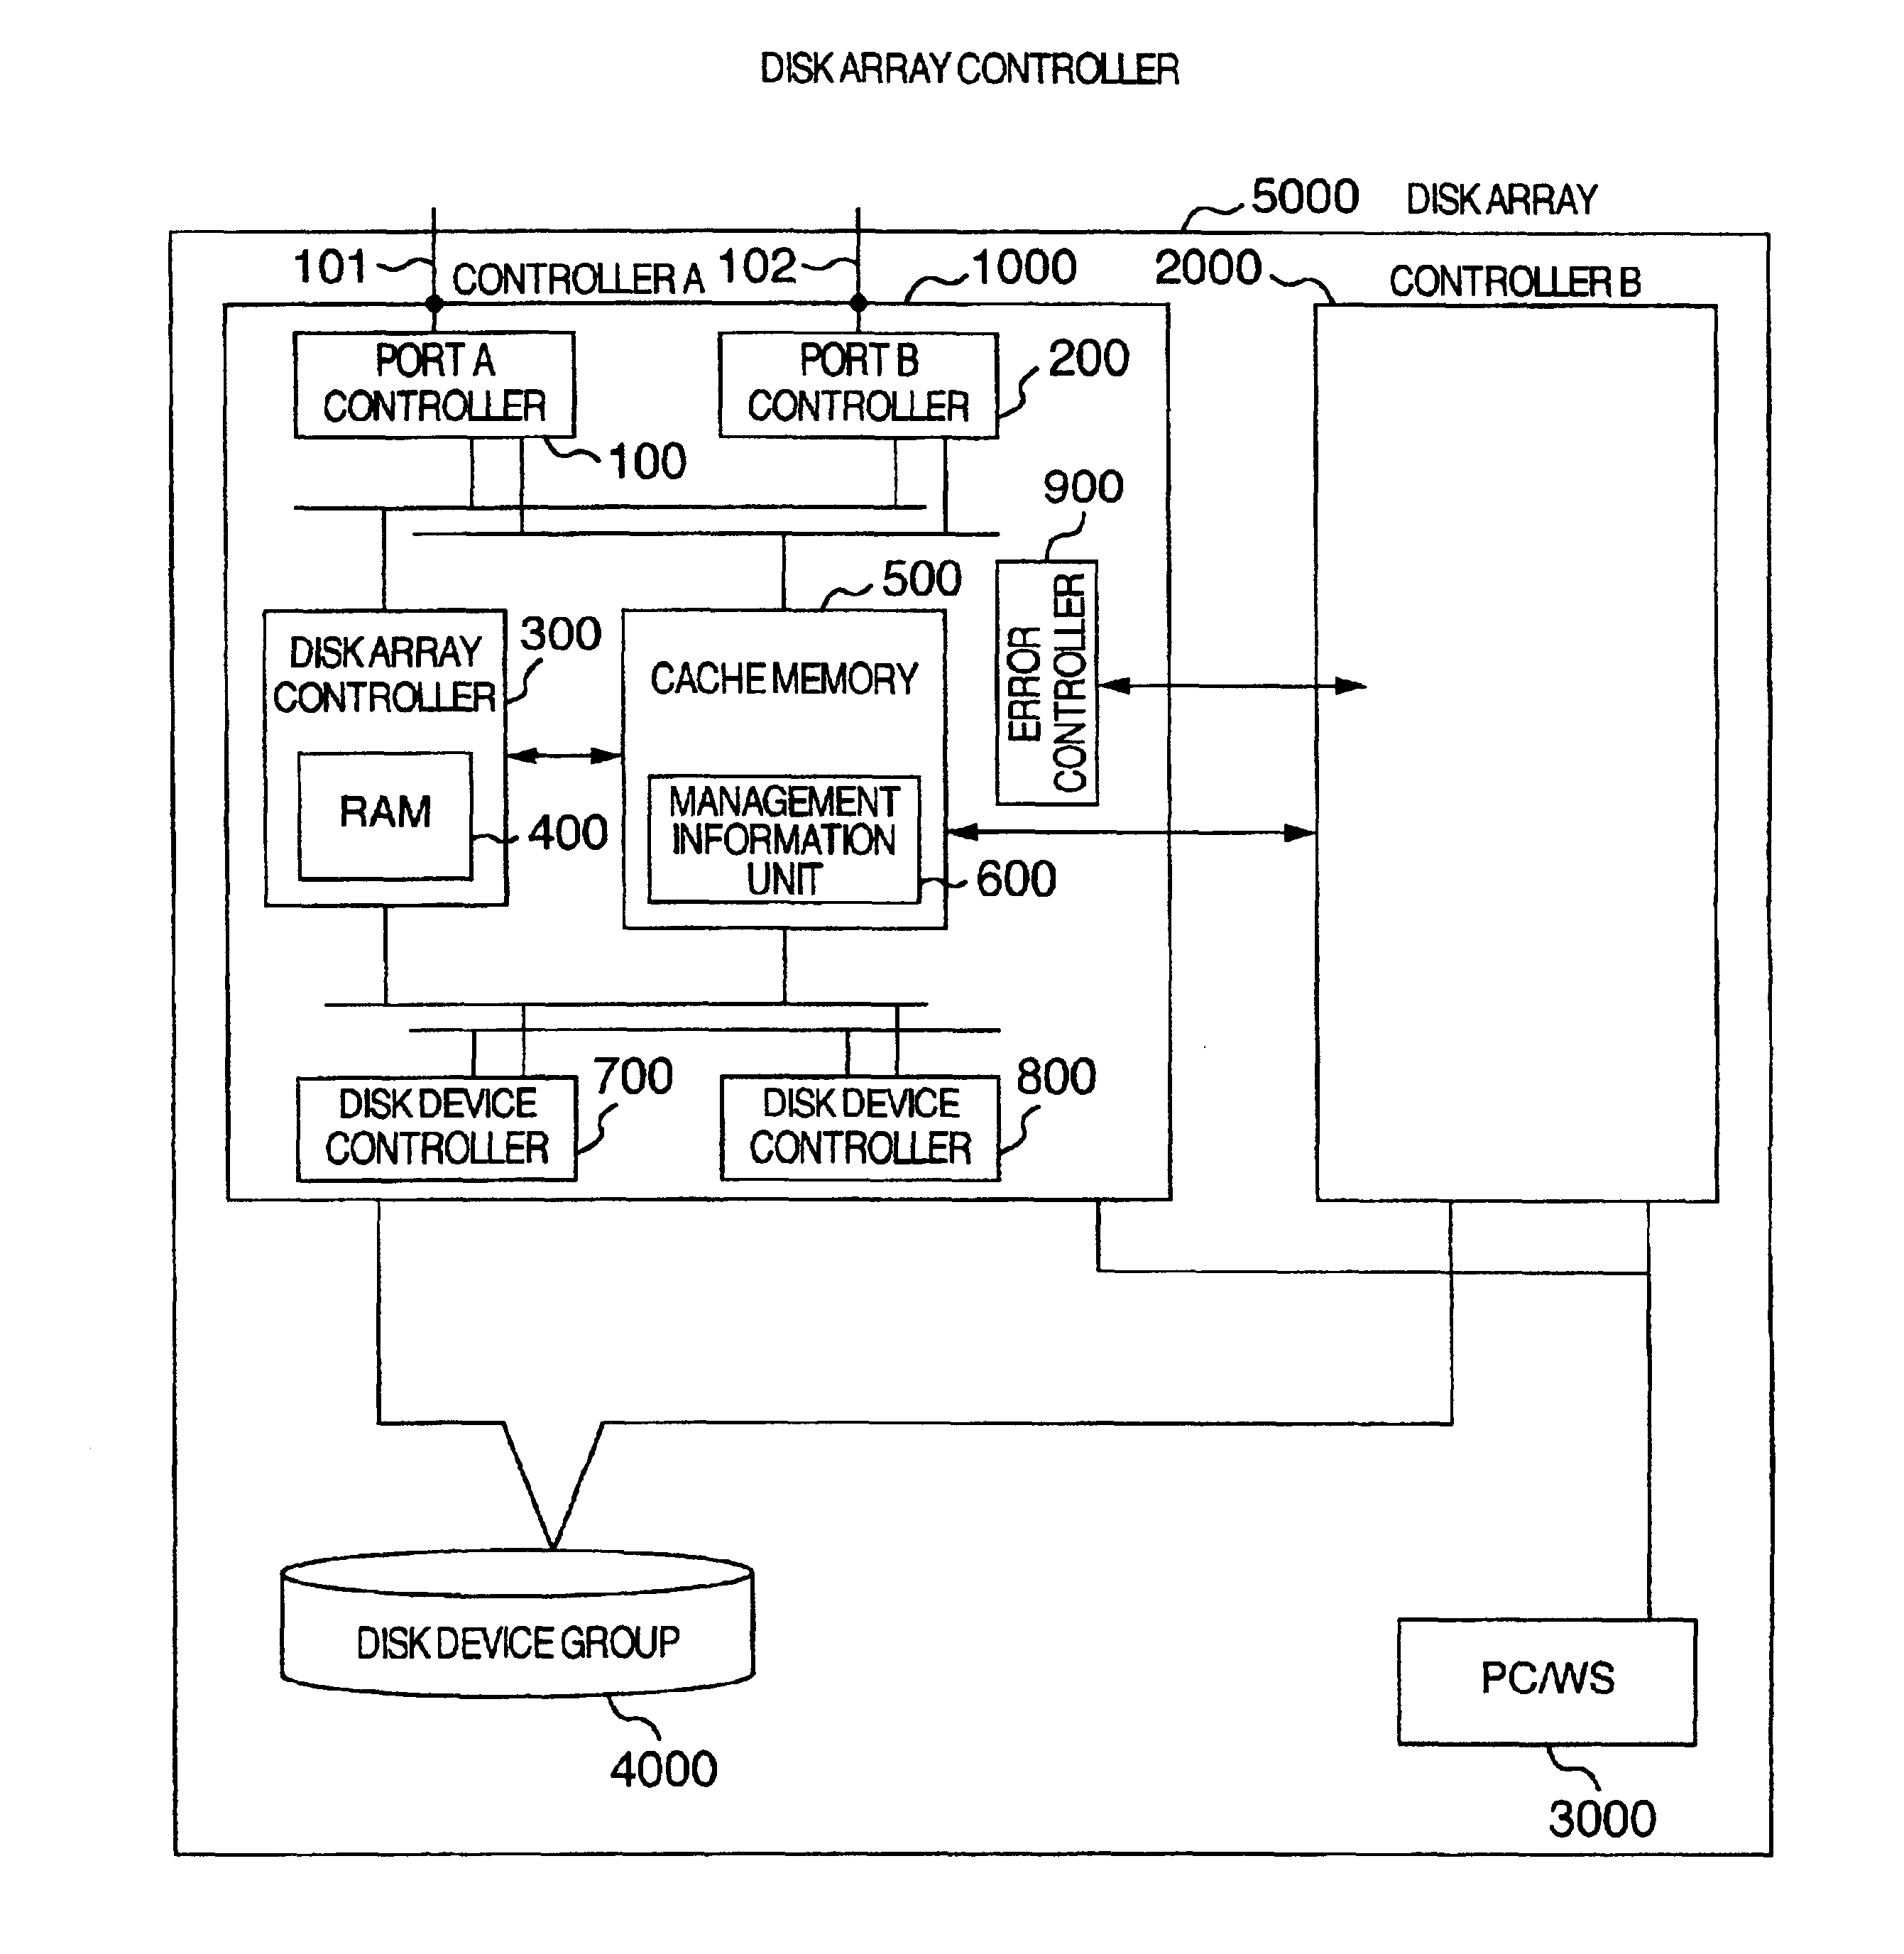 Storage subsystem that connects fiber channel and supports online backup